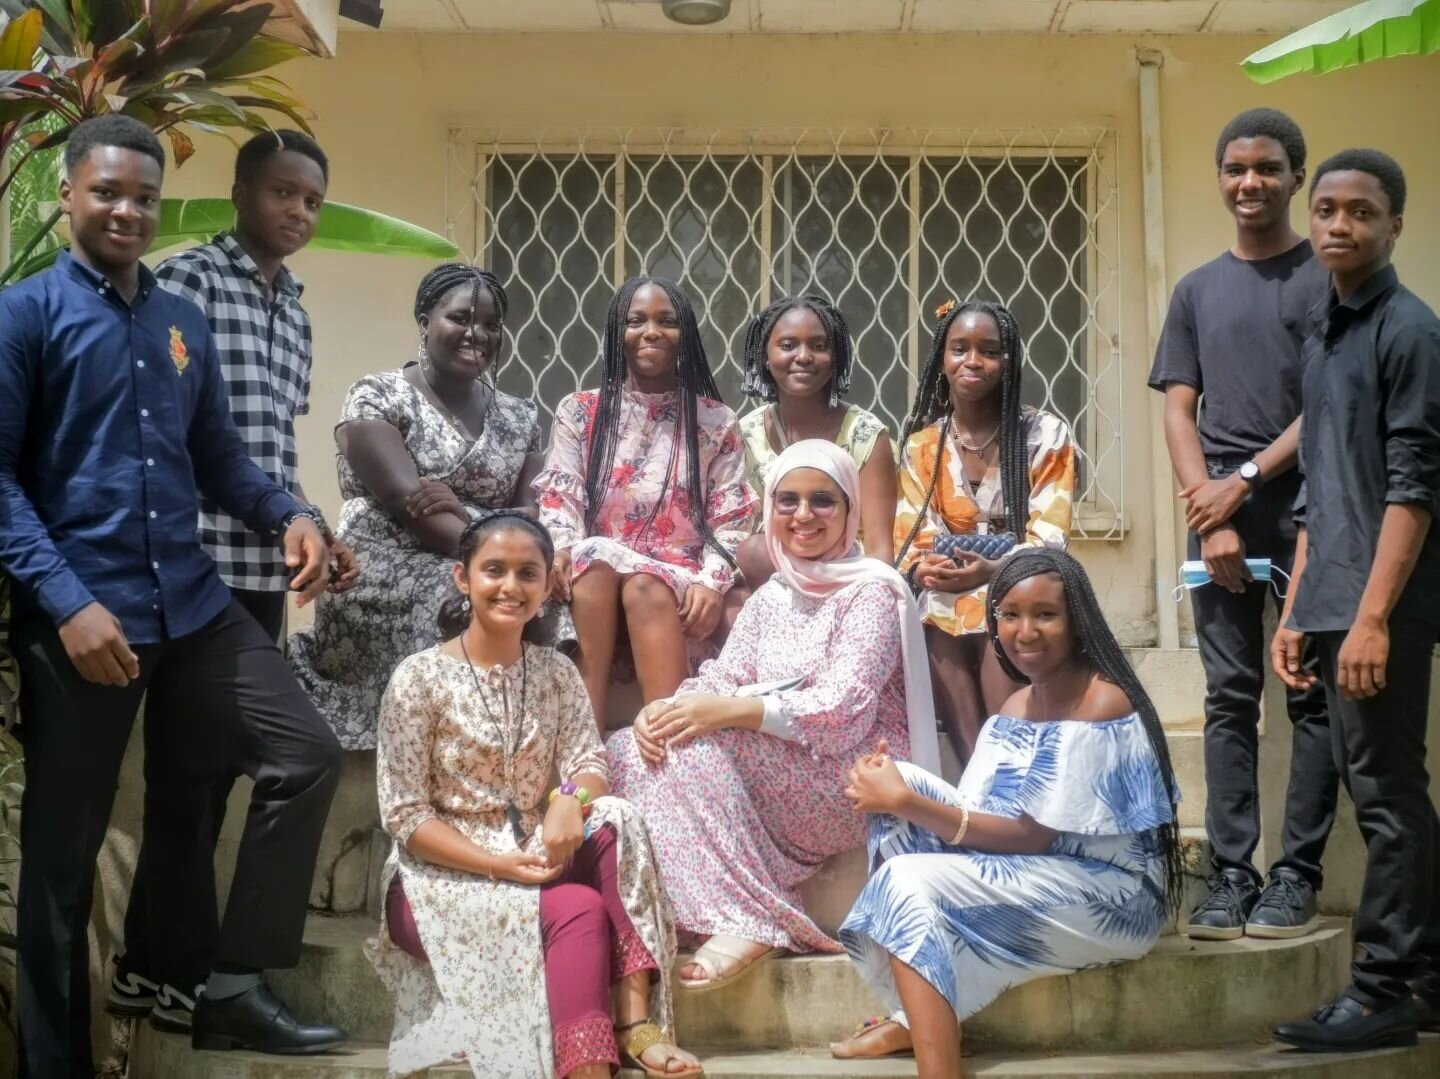 #IGCSEResultsDay with our IGCSE kids ❤️

Here's a weekender special featuring:
&bull; 1. Our 10th Grade IGCSE student family in their 90's vintage floral theme!
&bull; 2. IGCSE Geography students on a weekend field trip to Ado Awaye in Oyo State to c